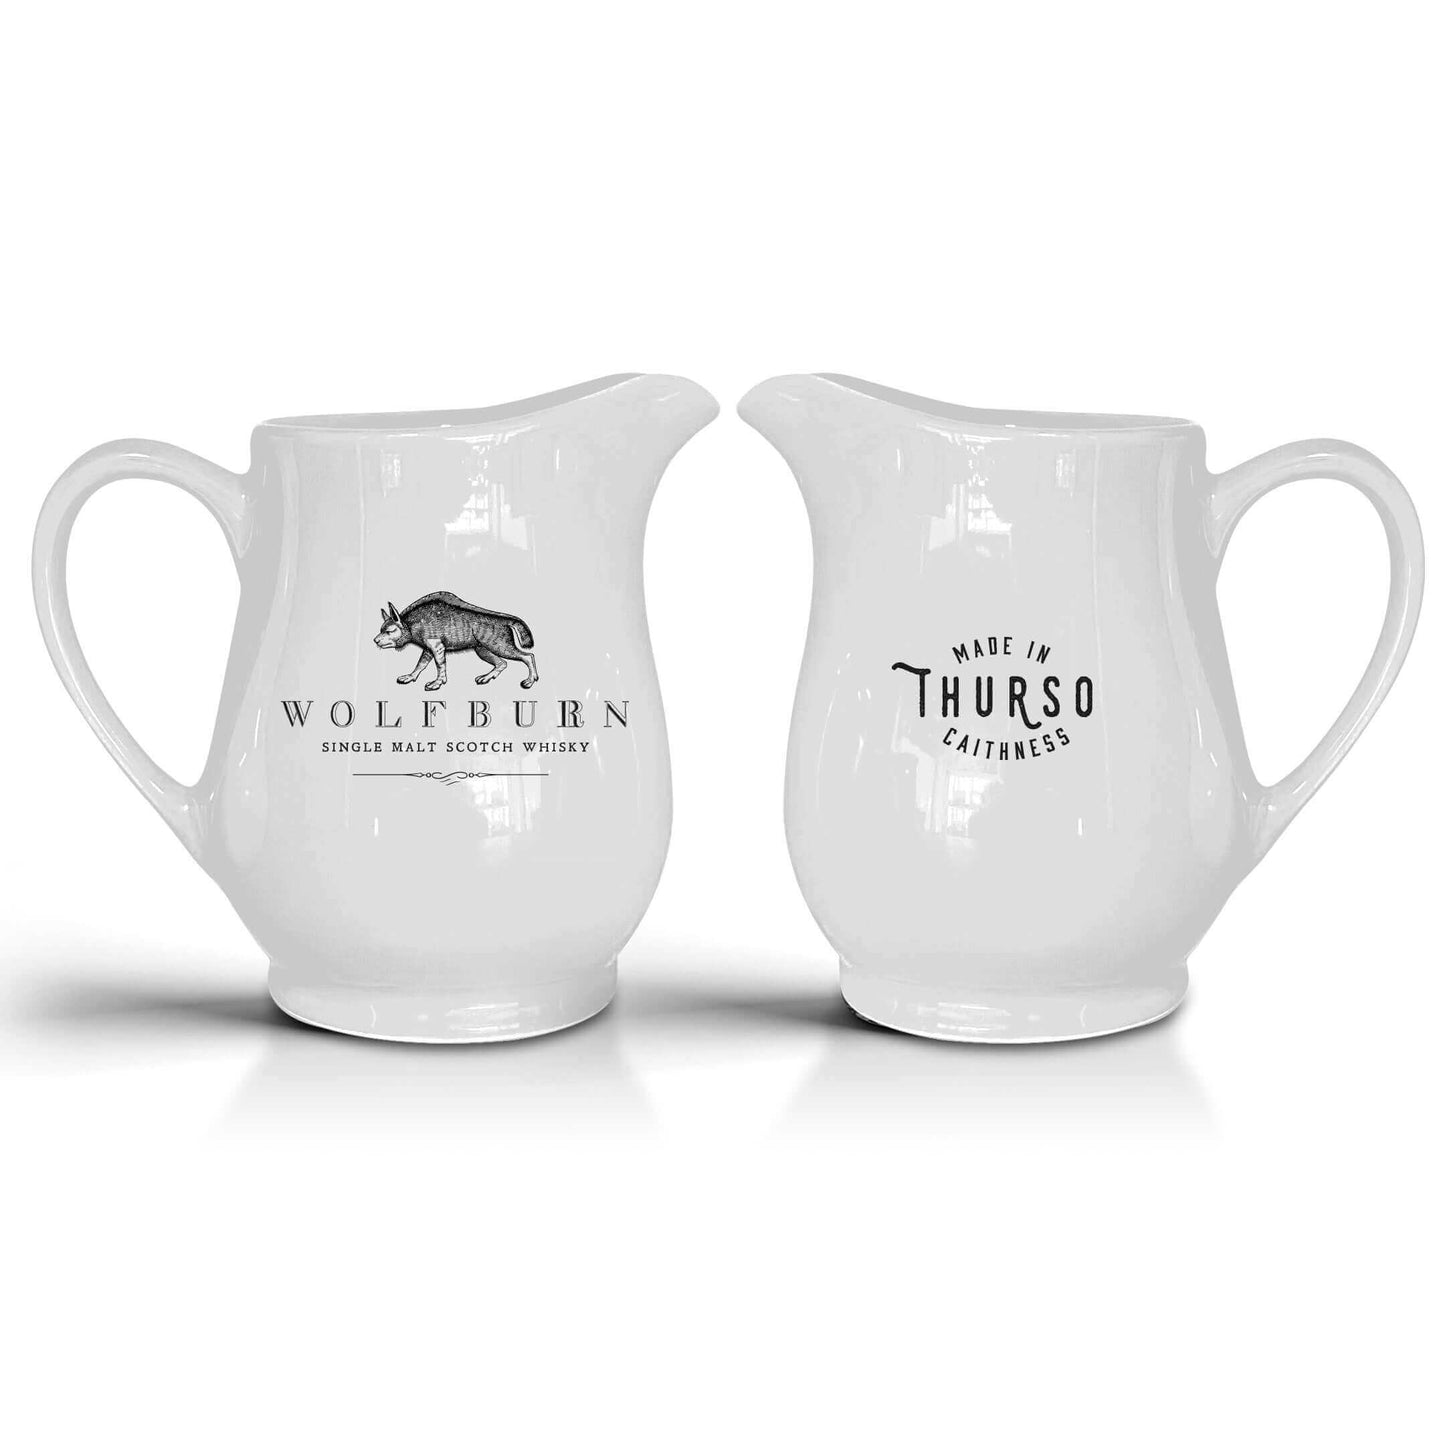 Wolfburn Water Jug - white These hand made 300ml Ceramic jugs are ideally suited for adding a splash of water to your whisky and will make a perfect gift or memory of Wolfburn.